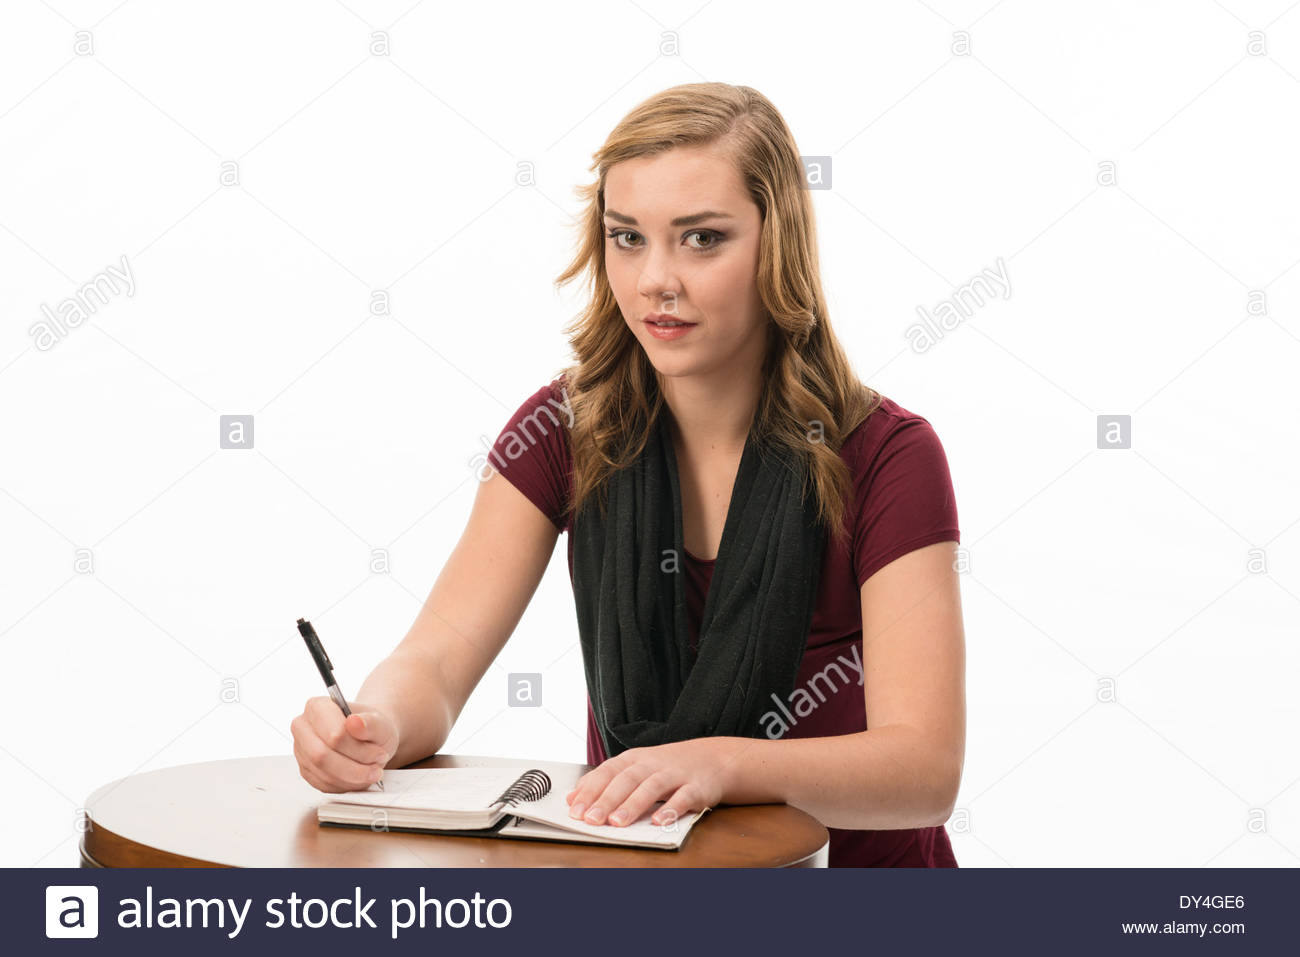 Teen Girl Sitting At A Desk Writing In A Note Book Stock Photo